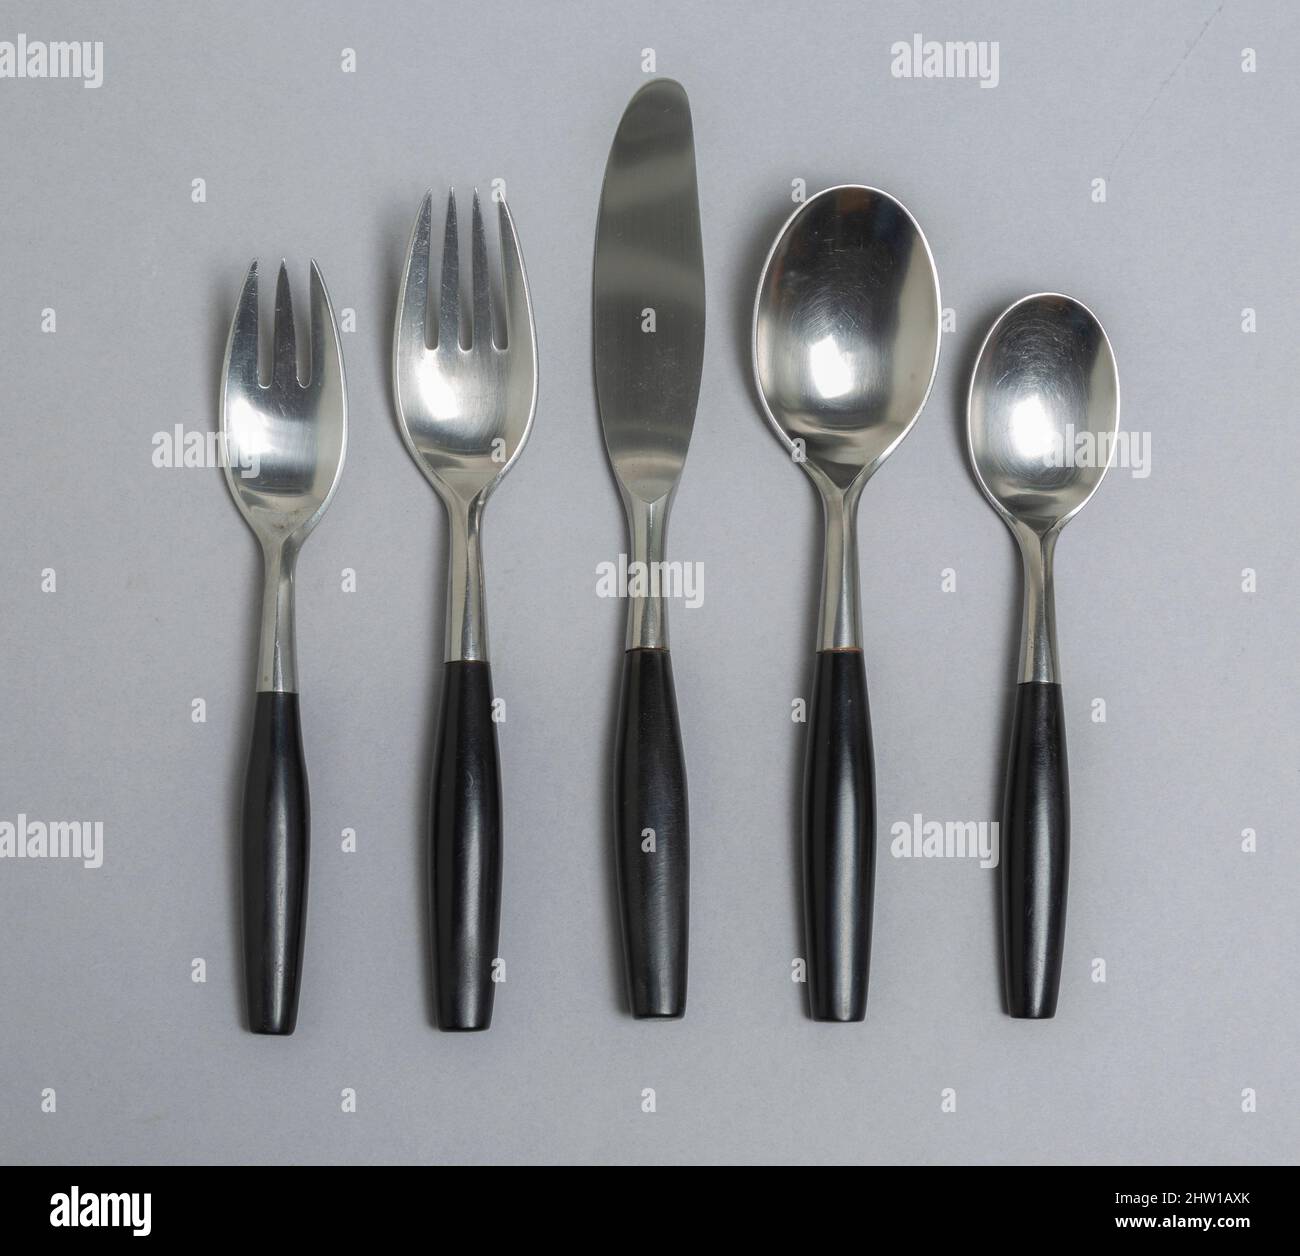 Kongo, by Dansk cutlery, 5-piece place setting with black plastic handles, 1954 design by Jens Quistgaard, Germany Stock Photo